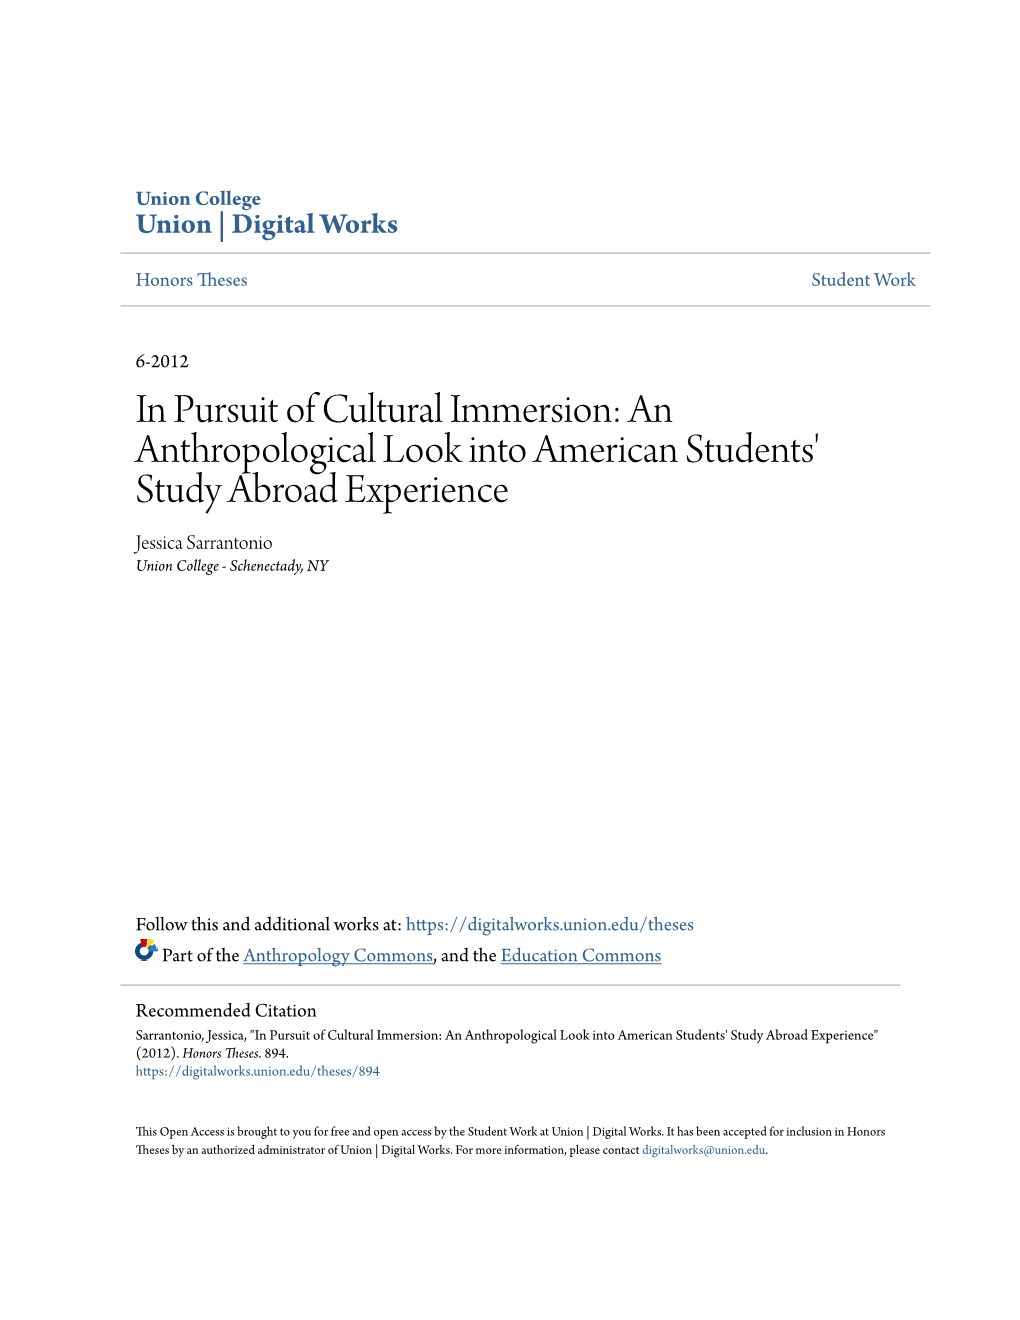 In Pursuit of Cultural Immersion: an Anthropological Look Into American Students' Study Abroad Experience Jessica Sarrantonio Union College - Schenectady, NY